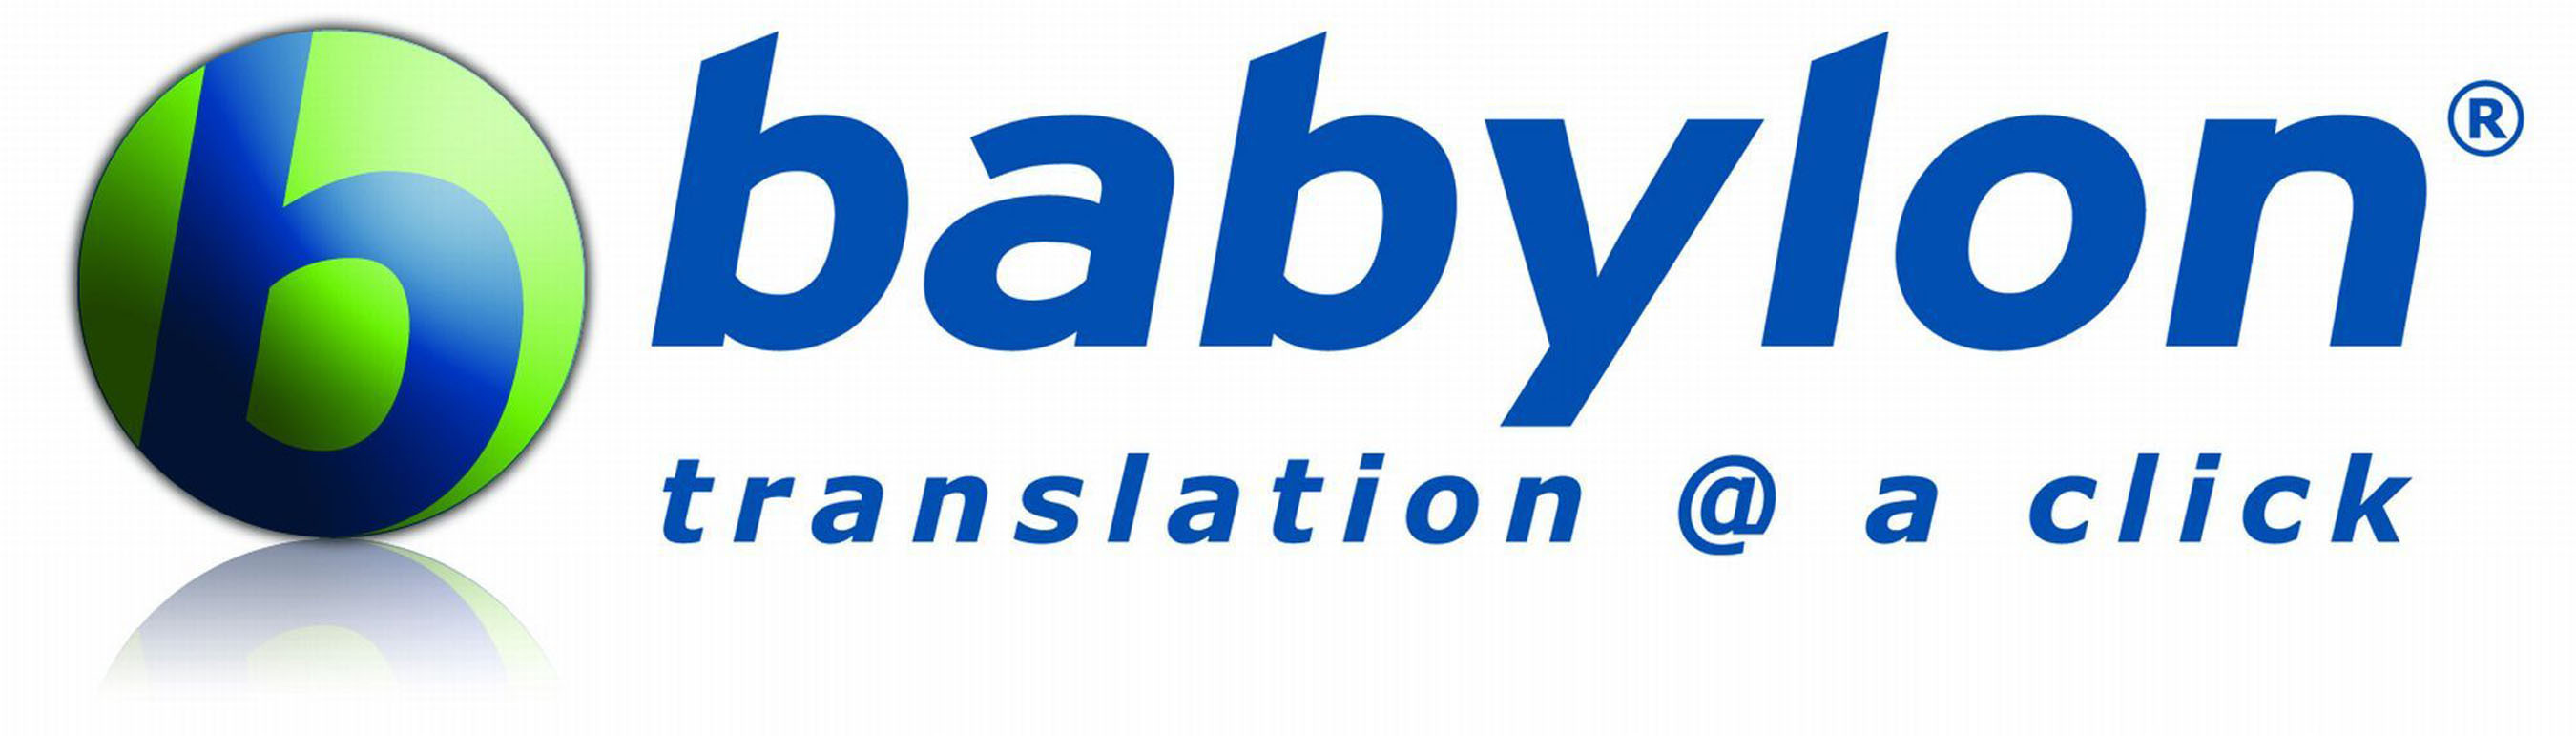 Babylon Has Done it Again and Ranked #1 in Translation Software